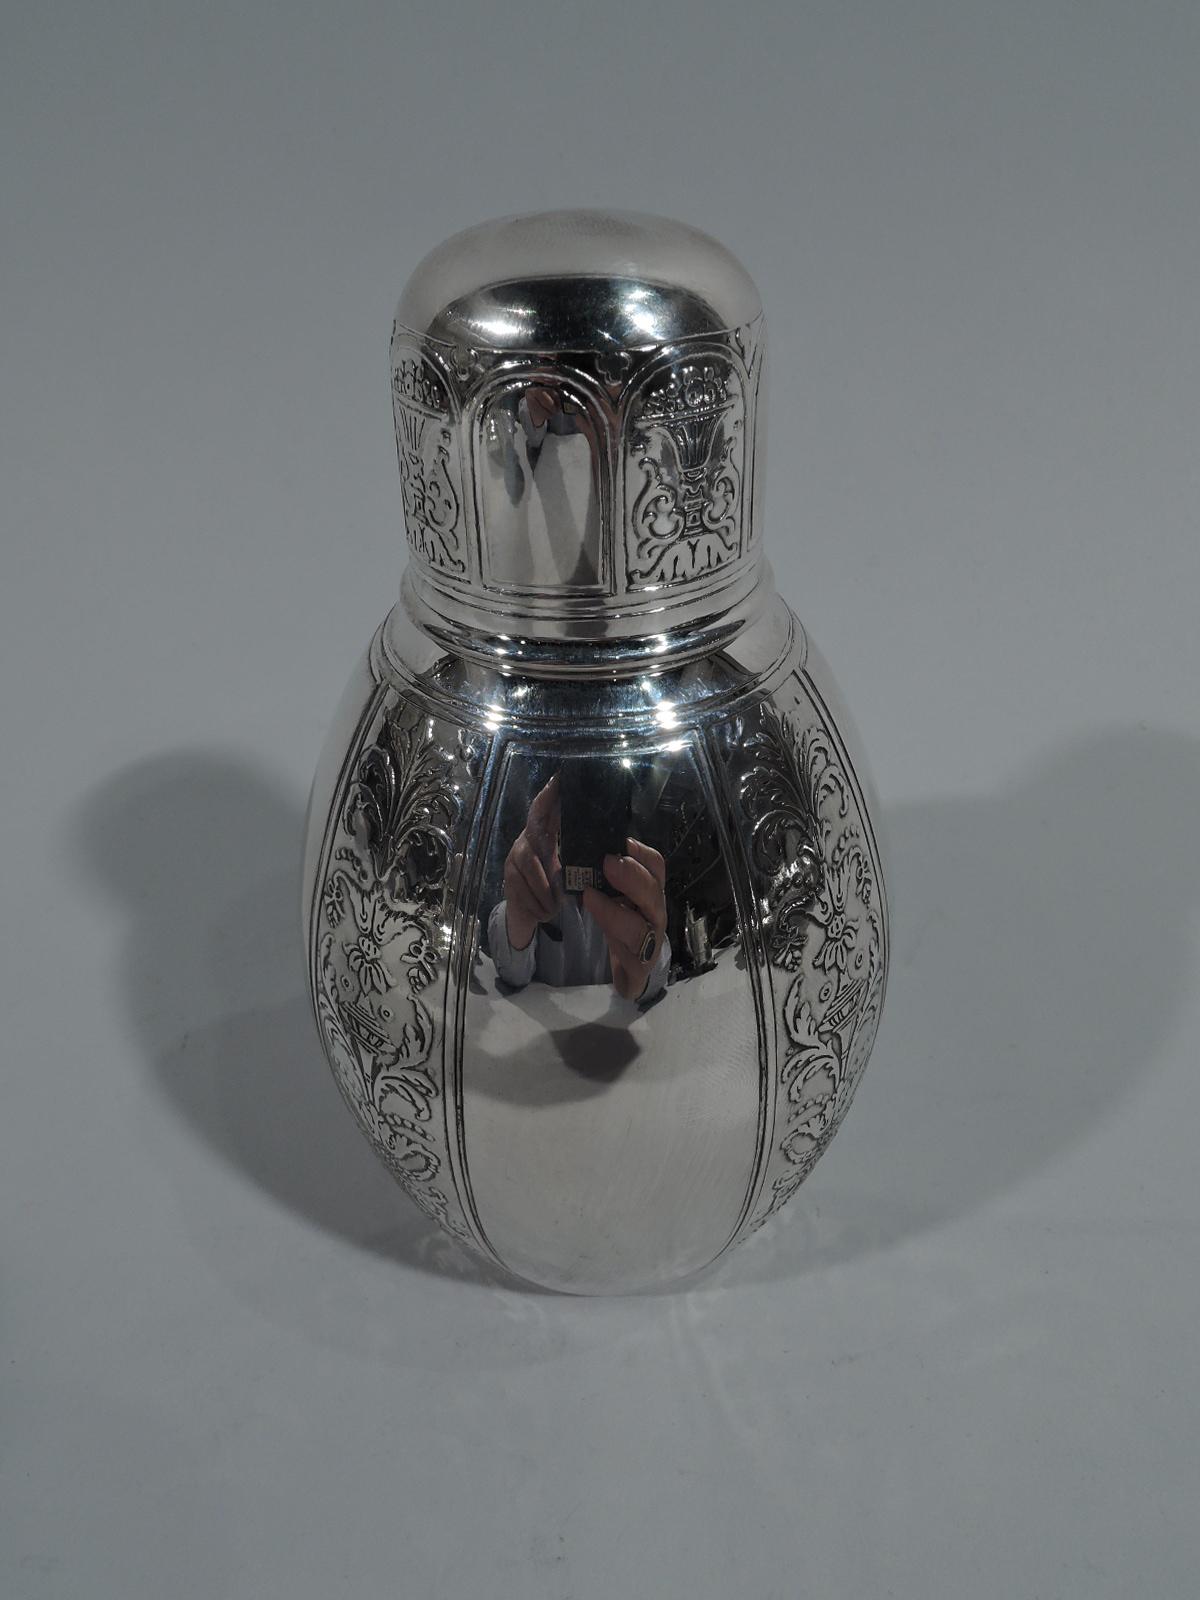 Renaissance-Revival sterling silver tea caddy. Made by Tiffany & Co. in New York, circa 1910. Ovoid with short neck and snug-fitting cover. Vertical ornament in form of alternating wide plain bands and narrow acid-etched ones with Grotesque